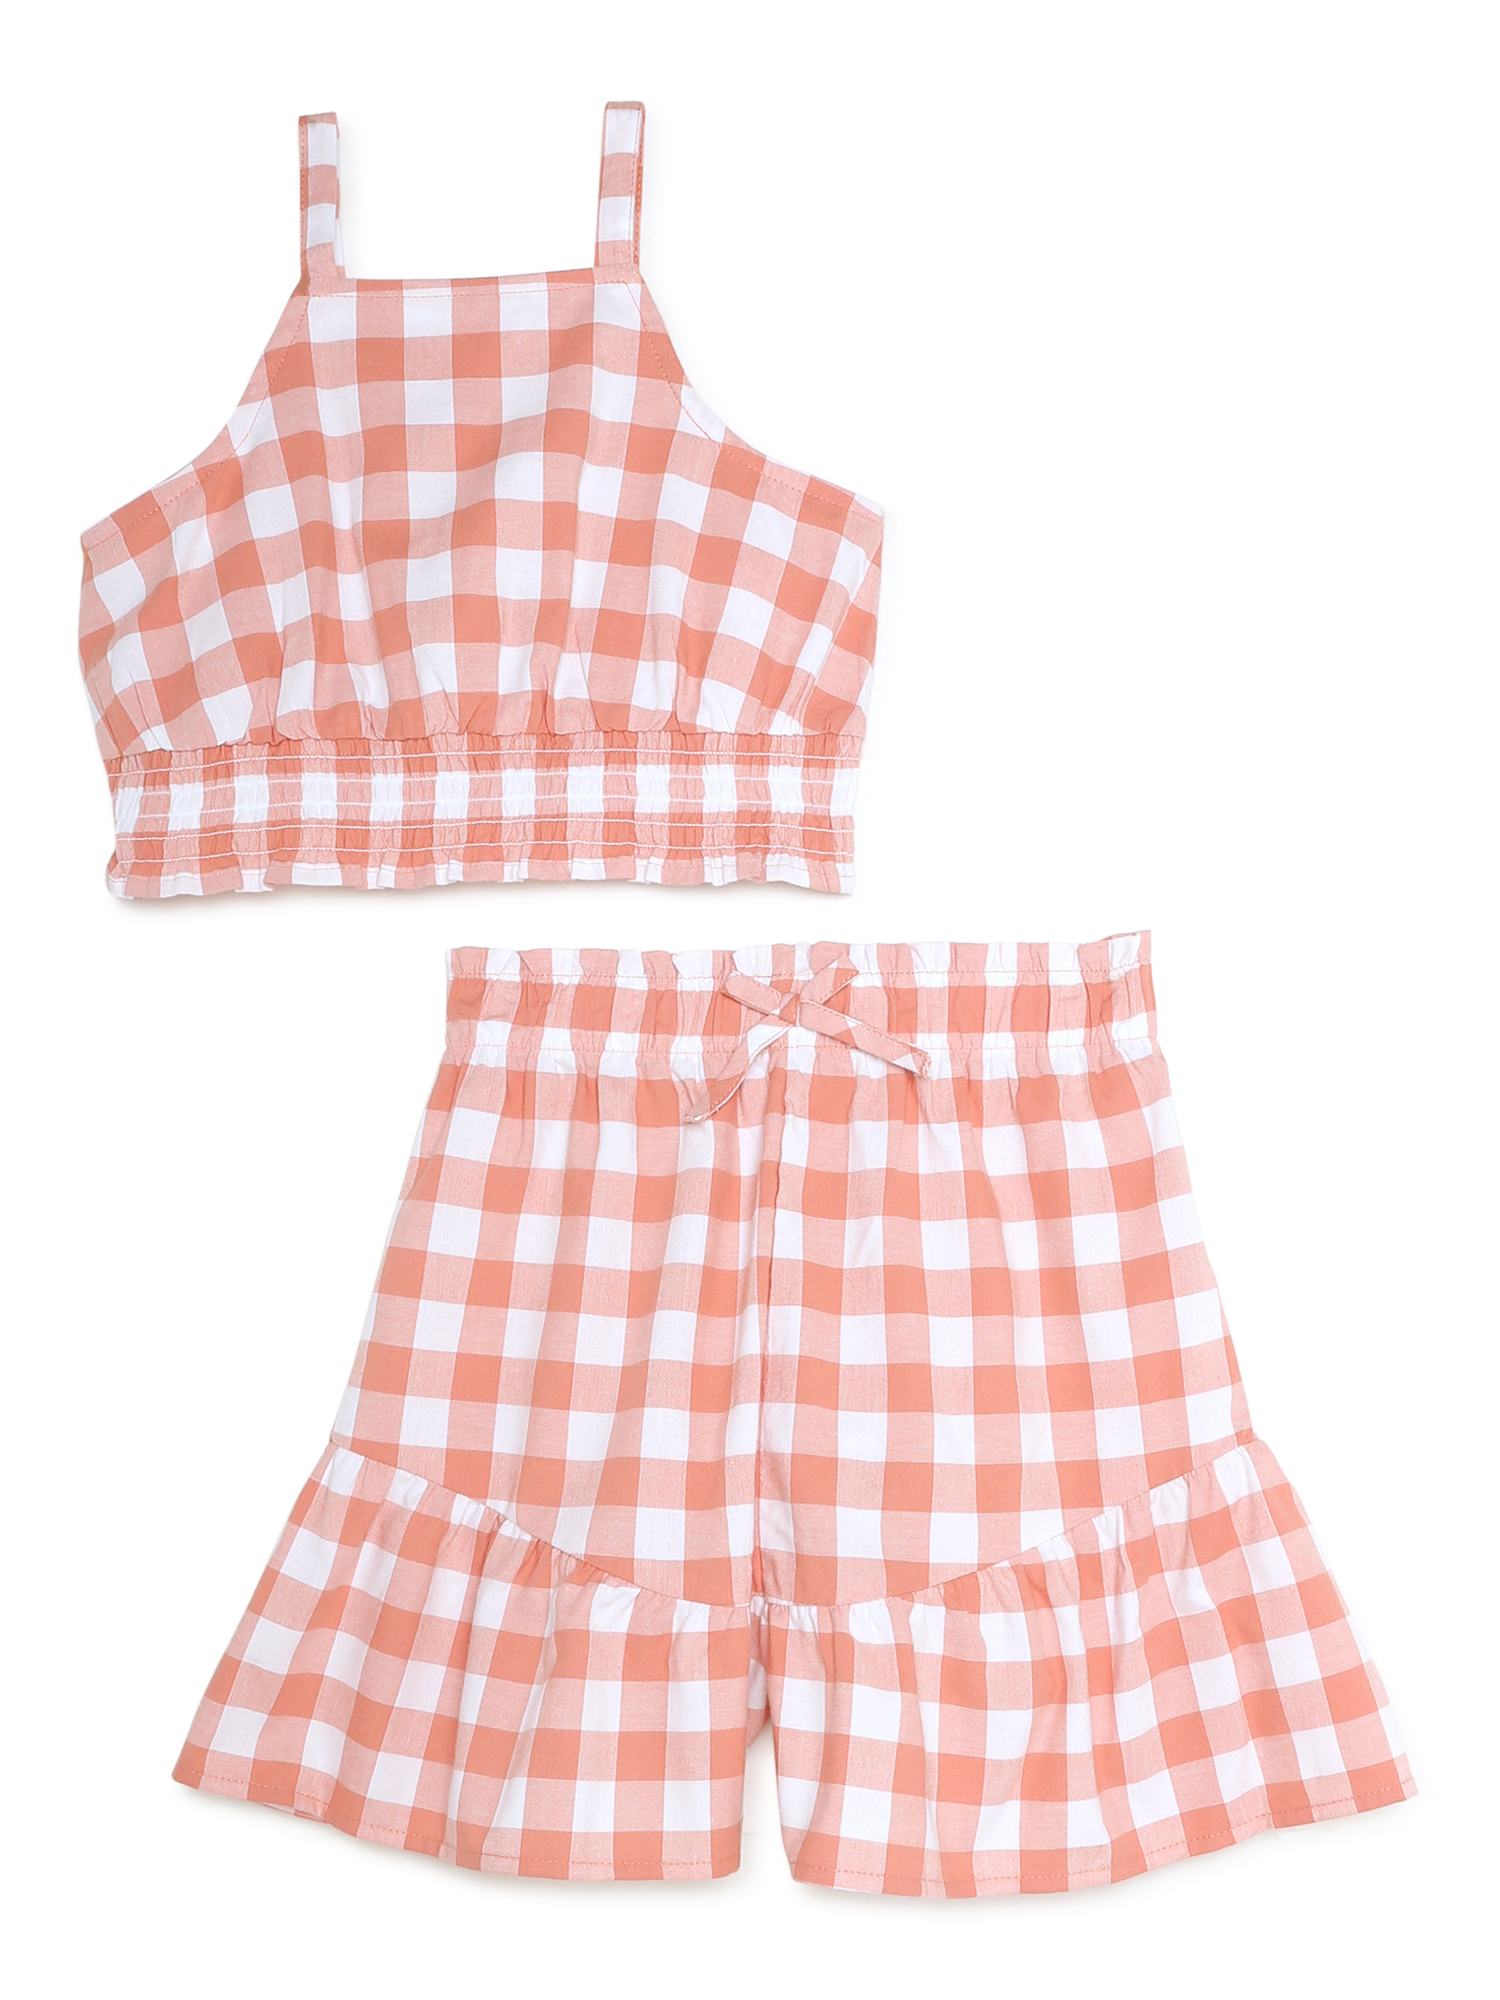 Wonder Nation Girls Gingham Tank Top and Shorts, 2-Piece Casual Outfit Set, Sizes 4-18 & Plus - image 2 of 6